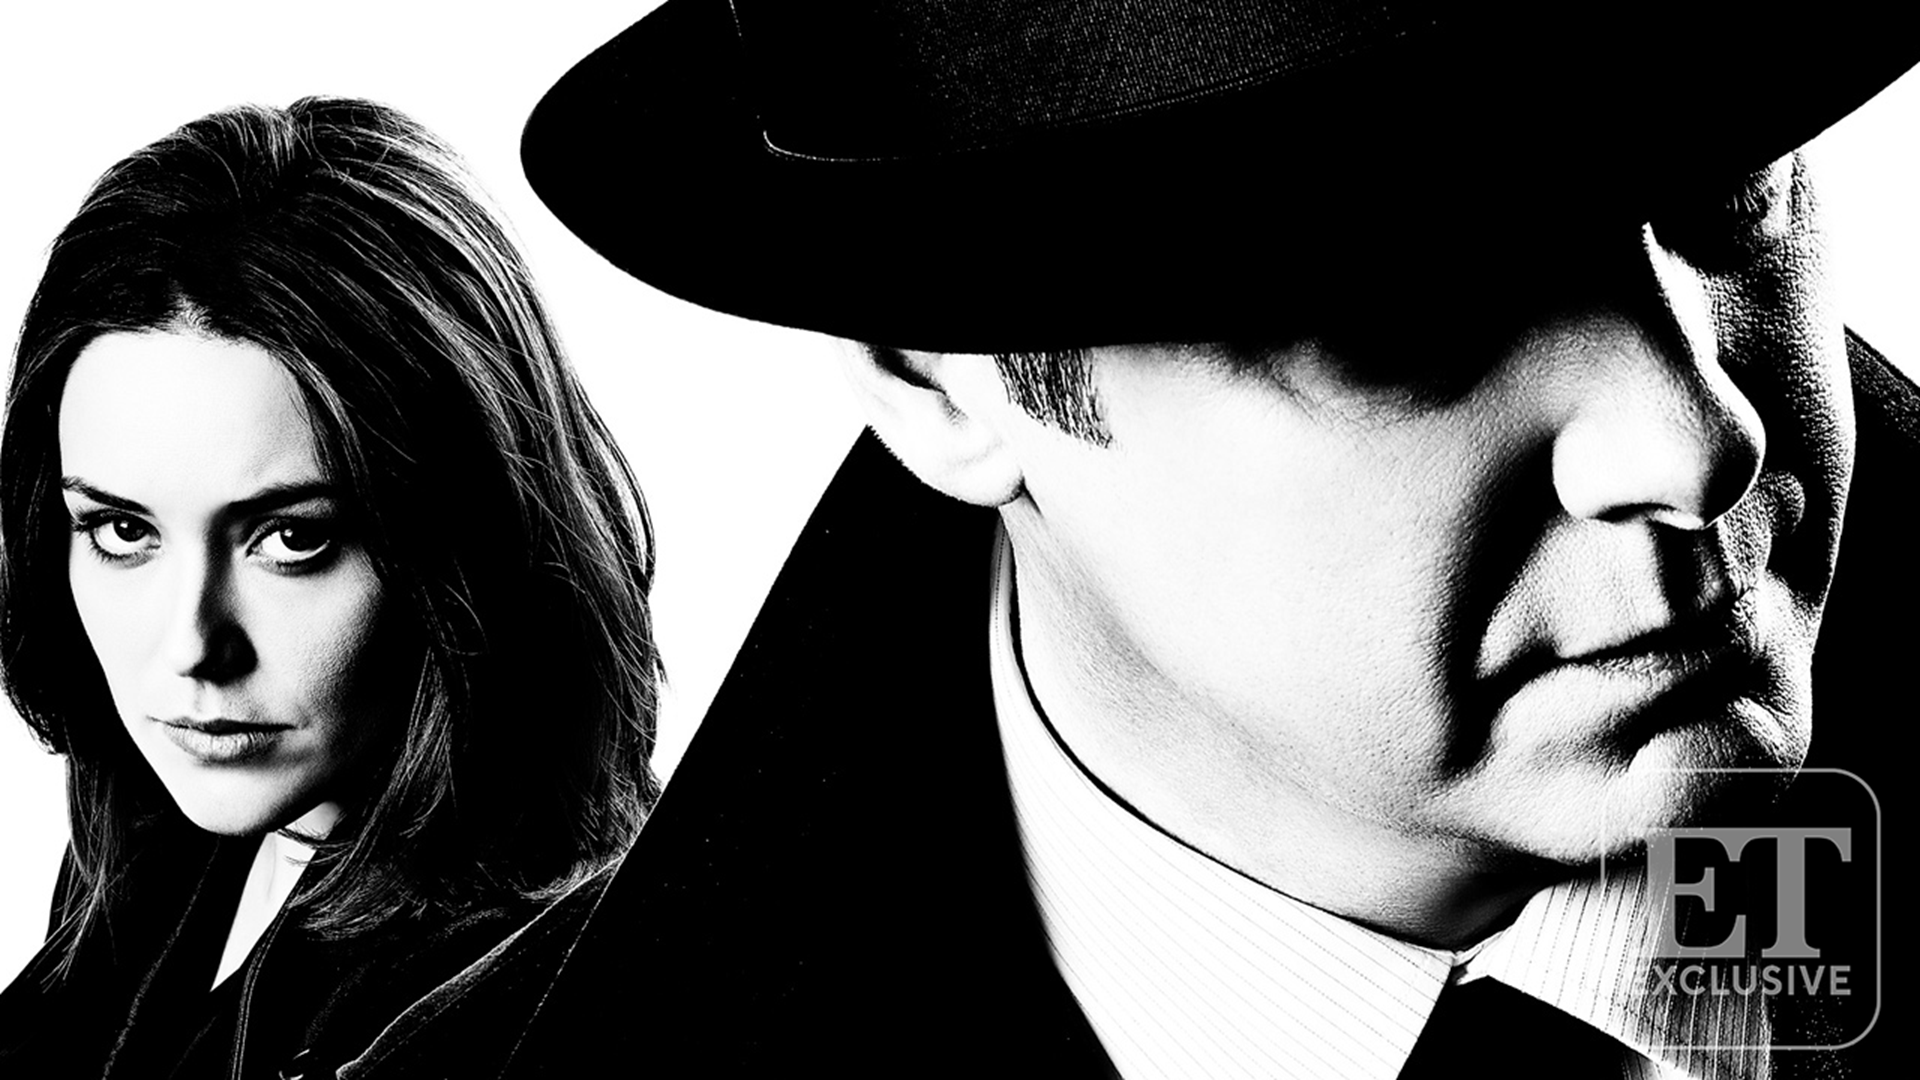 The Blacklist Season 8 Poster Teases Secrets And Lies First Look